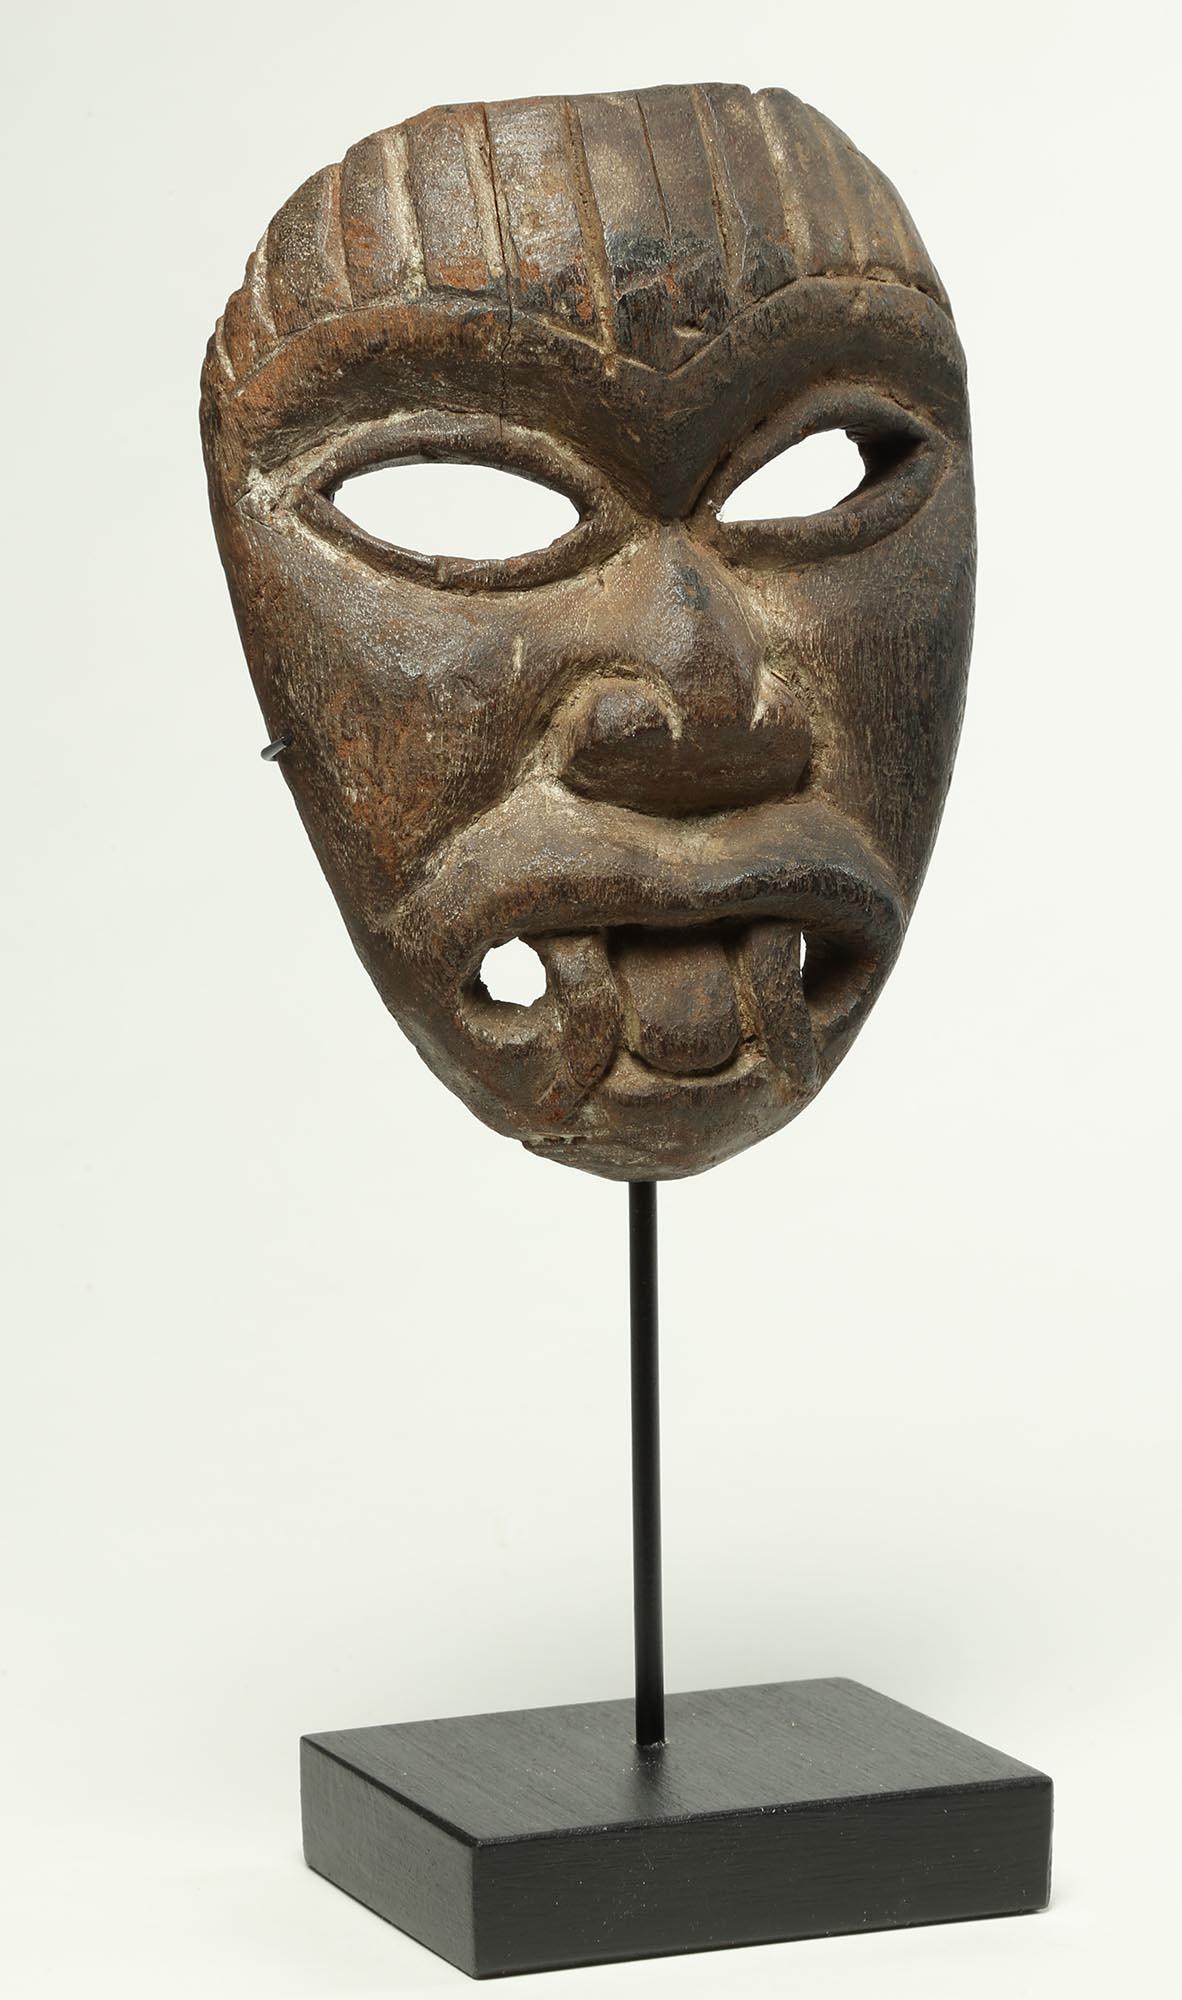 An intense demon-chaser mask from Nepal, Northern India or other Himalayan culture. Carved wood, early 20th century. Open mouth with fangs, wild asymmetrical eyes and detailed hair. Depicts a protective demon-like visage thought to repel malevolent